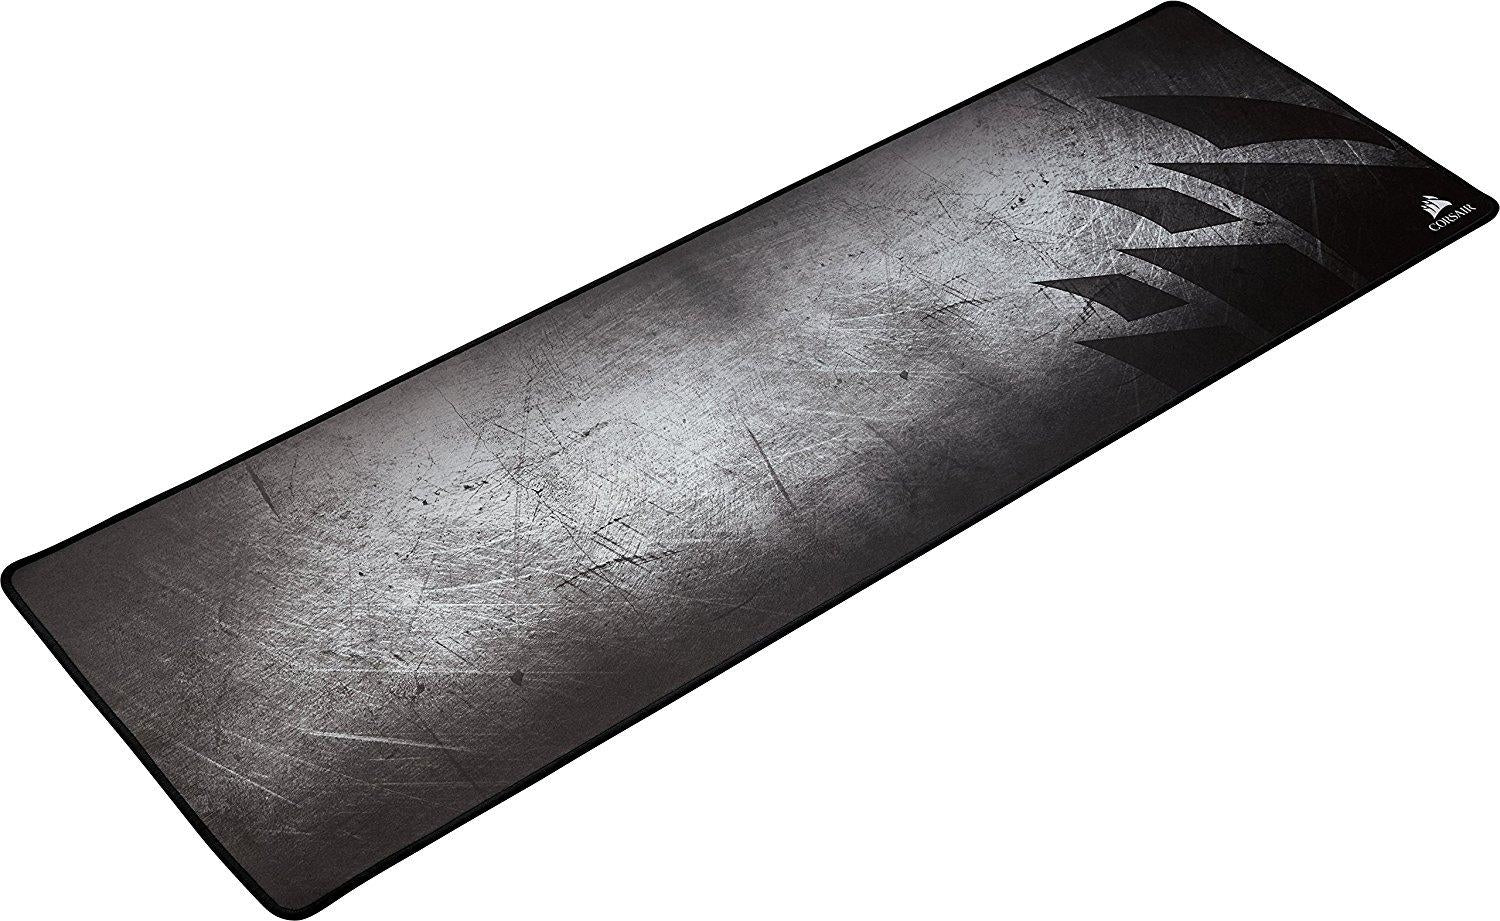 Corsair MM300 Anti-Fray Cloth Gaming Mouse Mat-Extended (CH-9000108-WW) - V&L Canada